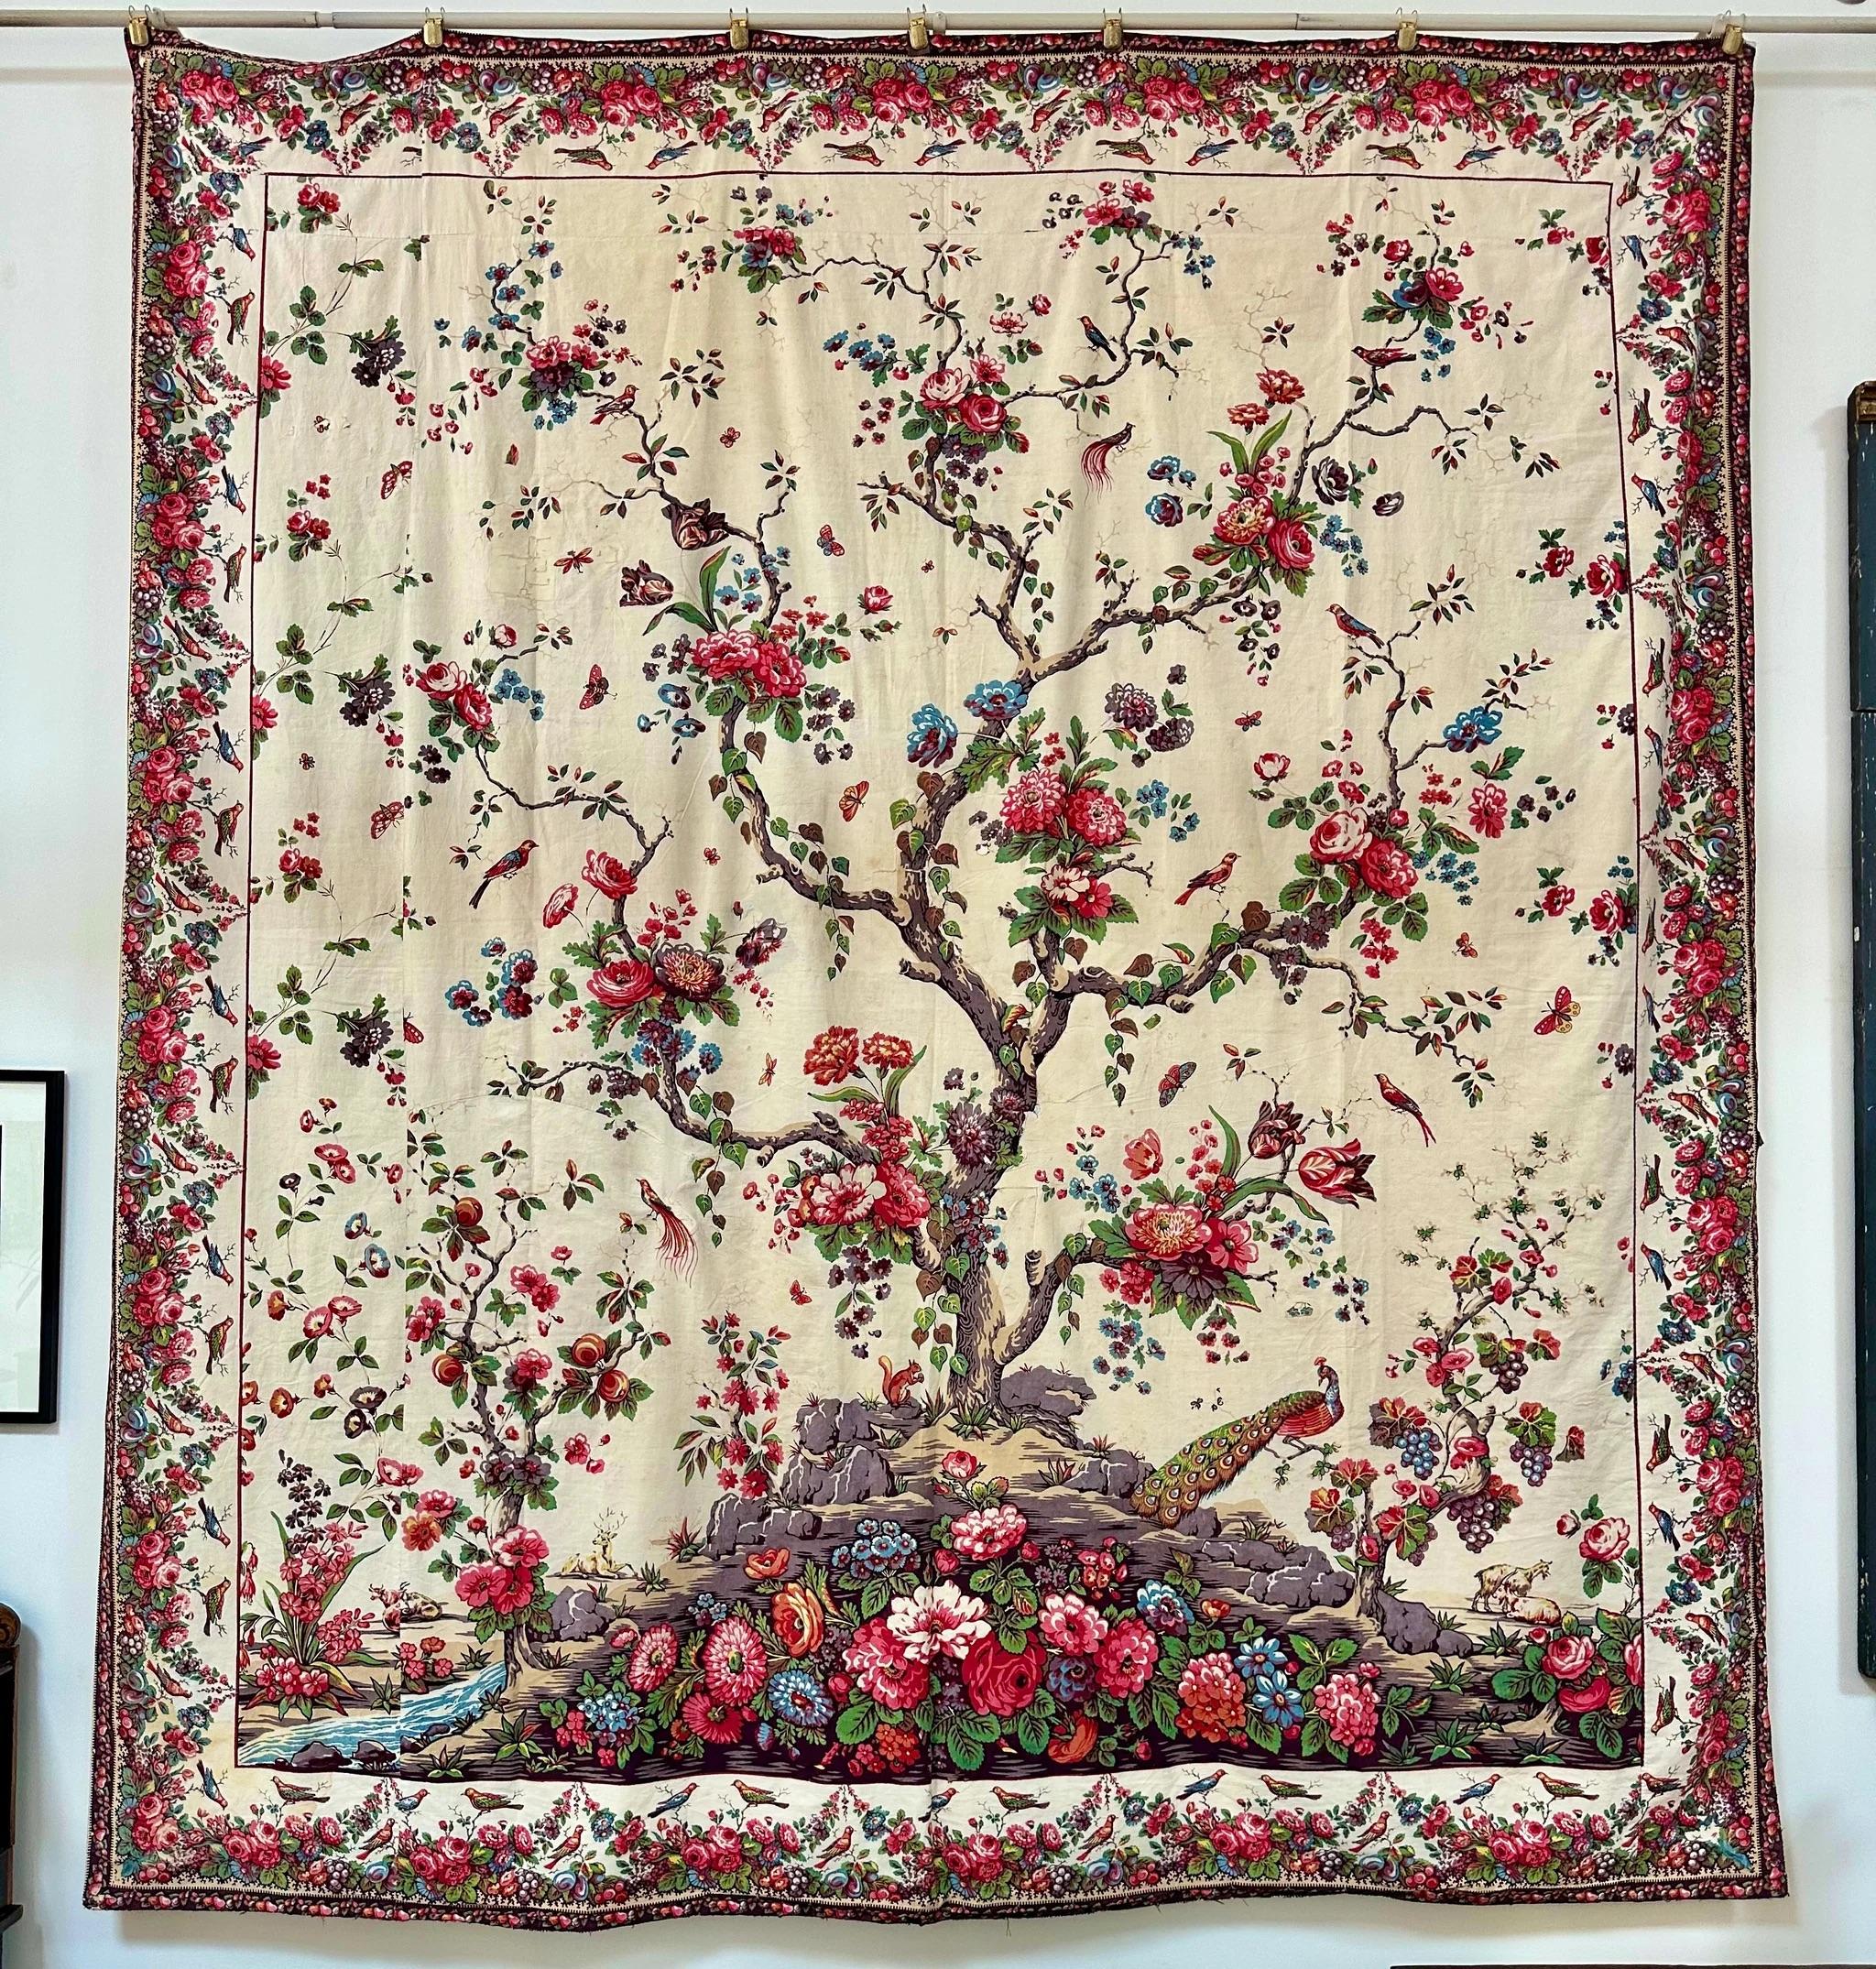 A rare and lovely Italian Mezzaro,delle vacchette (with cows) made in Genoa, c. 1830, cotton, block-printed. Some repairs.  Mezzari were made in Italy in the Indienne tradition, often in the form of Palampores, as is this one.  Note the exuberant